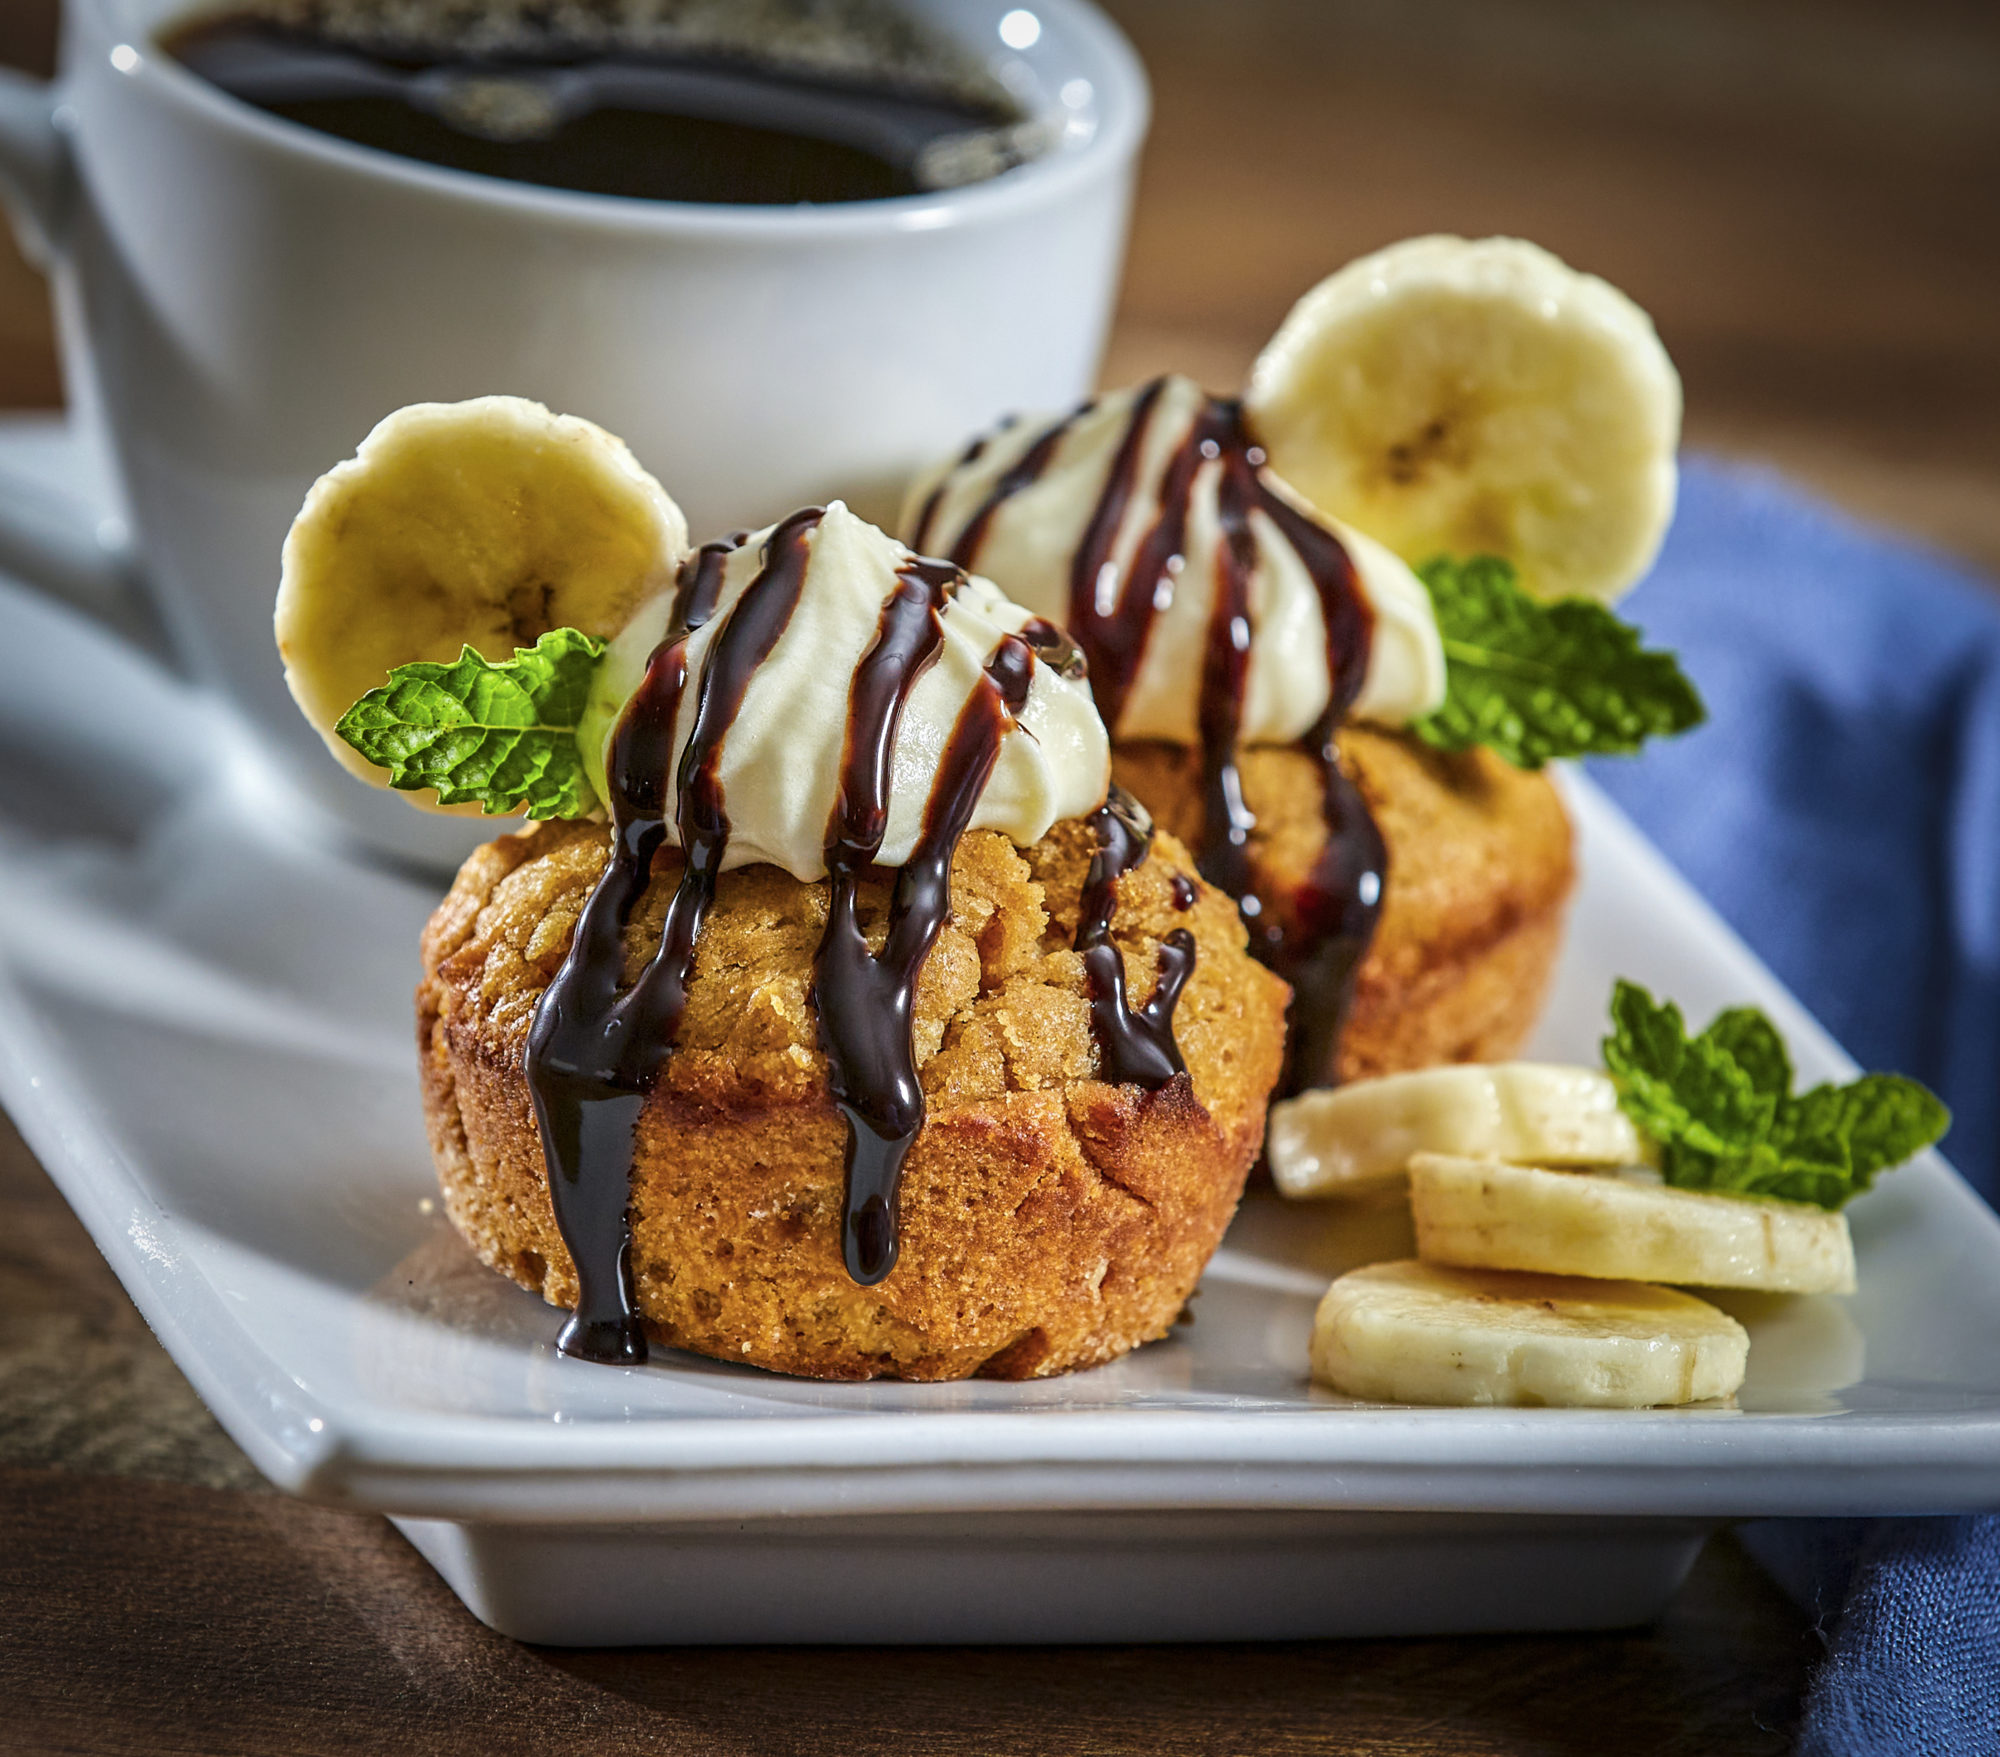 Peanut Butter Banana Muffins with Chocolate Drizzle